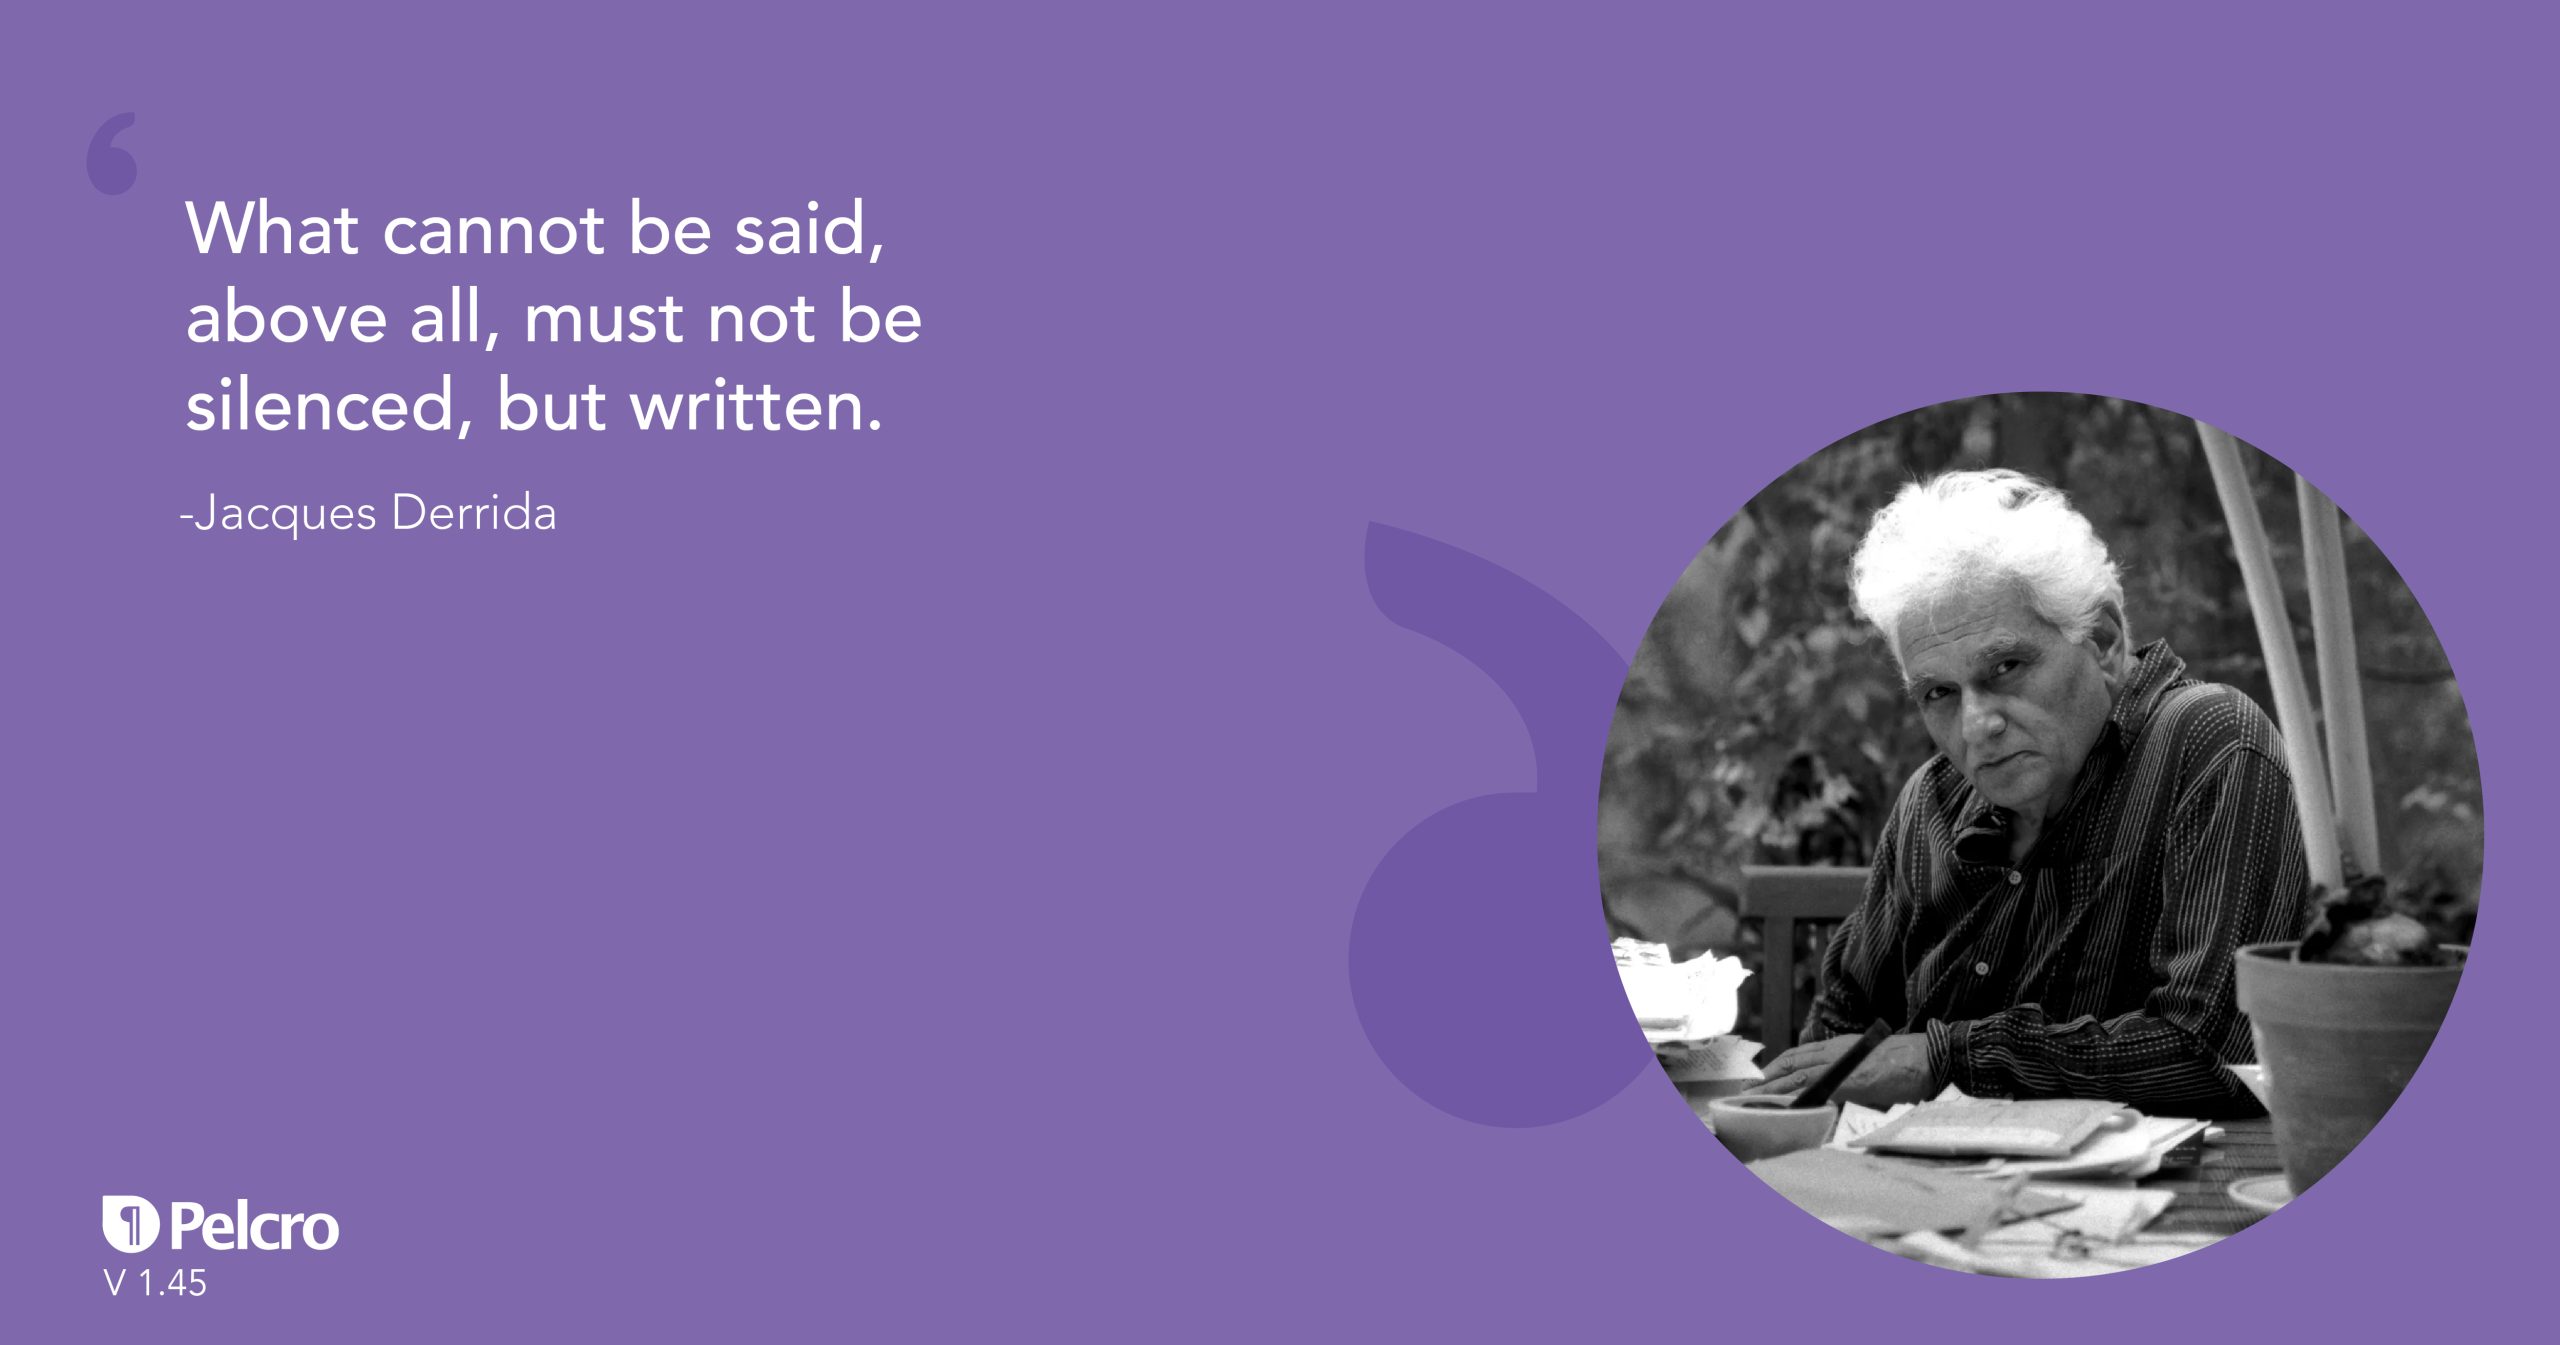 a picture of jacques derrida with a quote from him
"what cannot be said, above all, must not be silenced, but written."